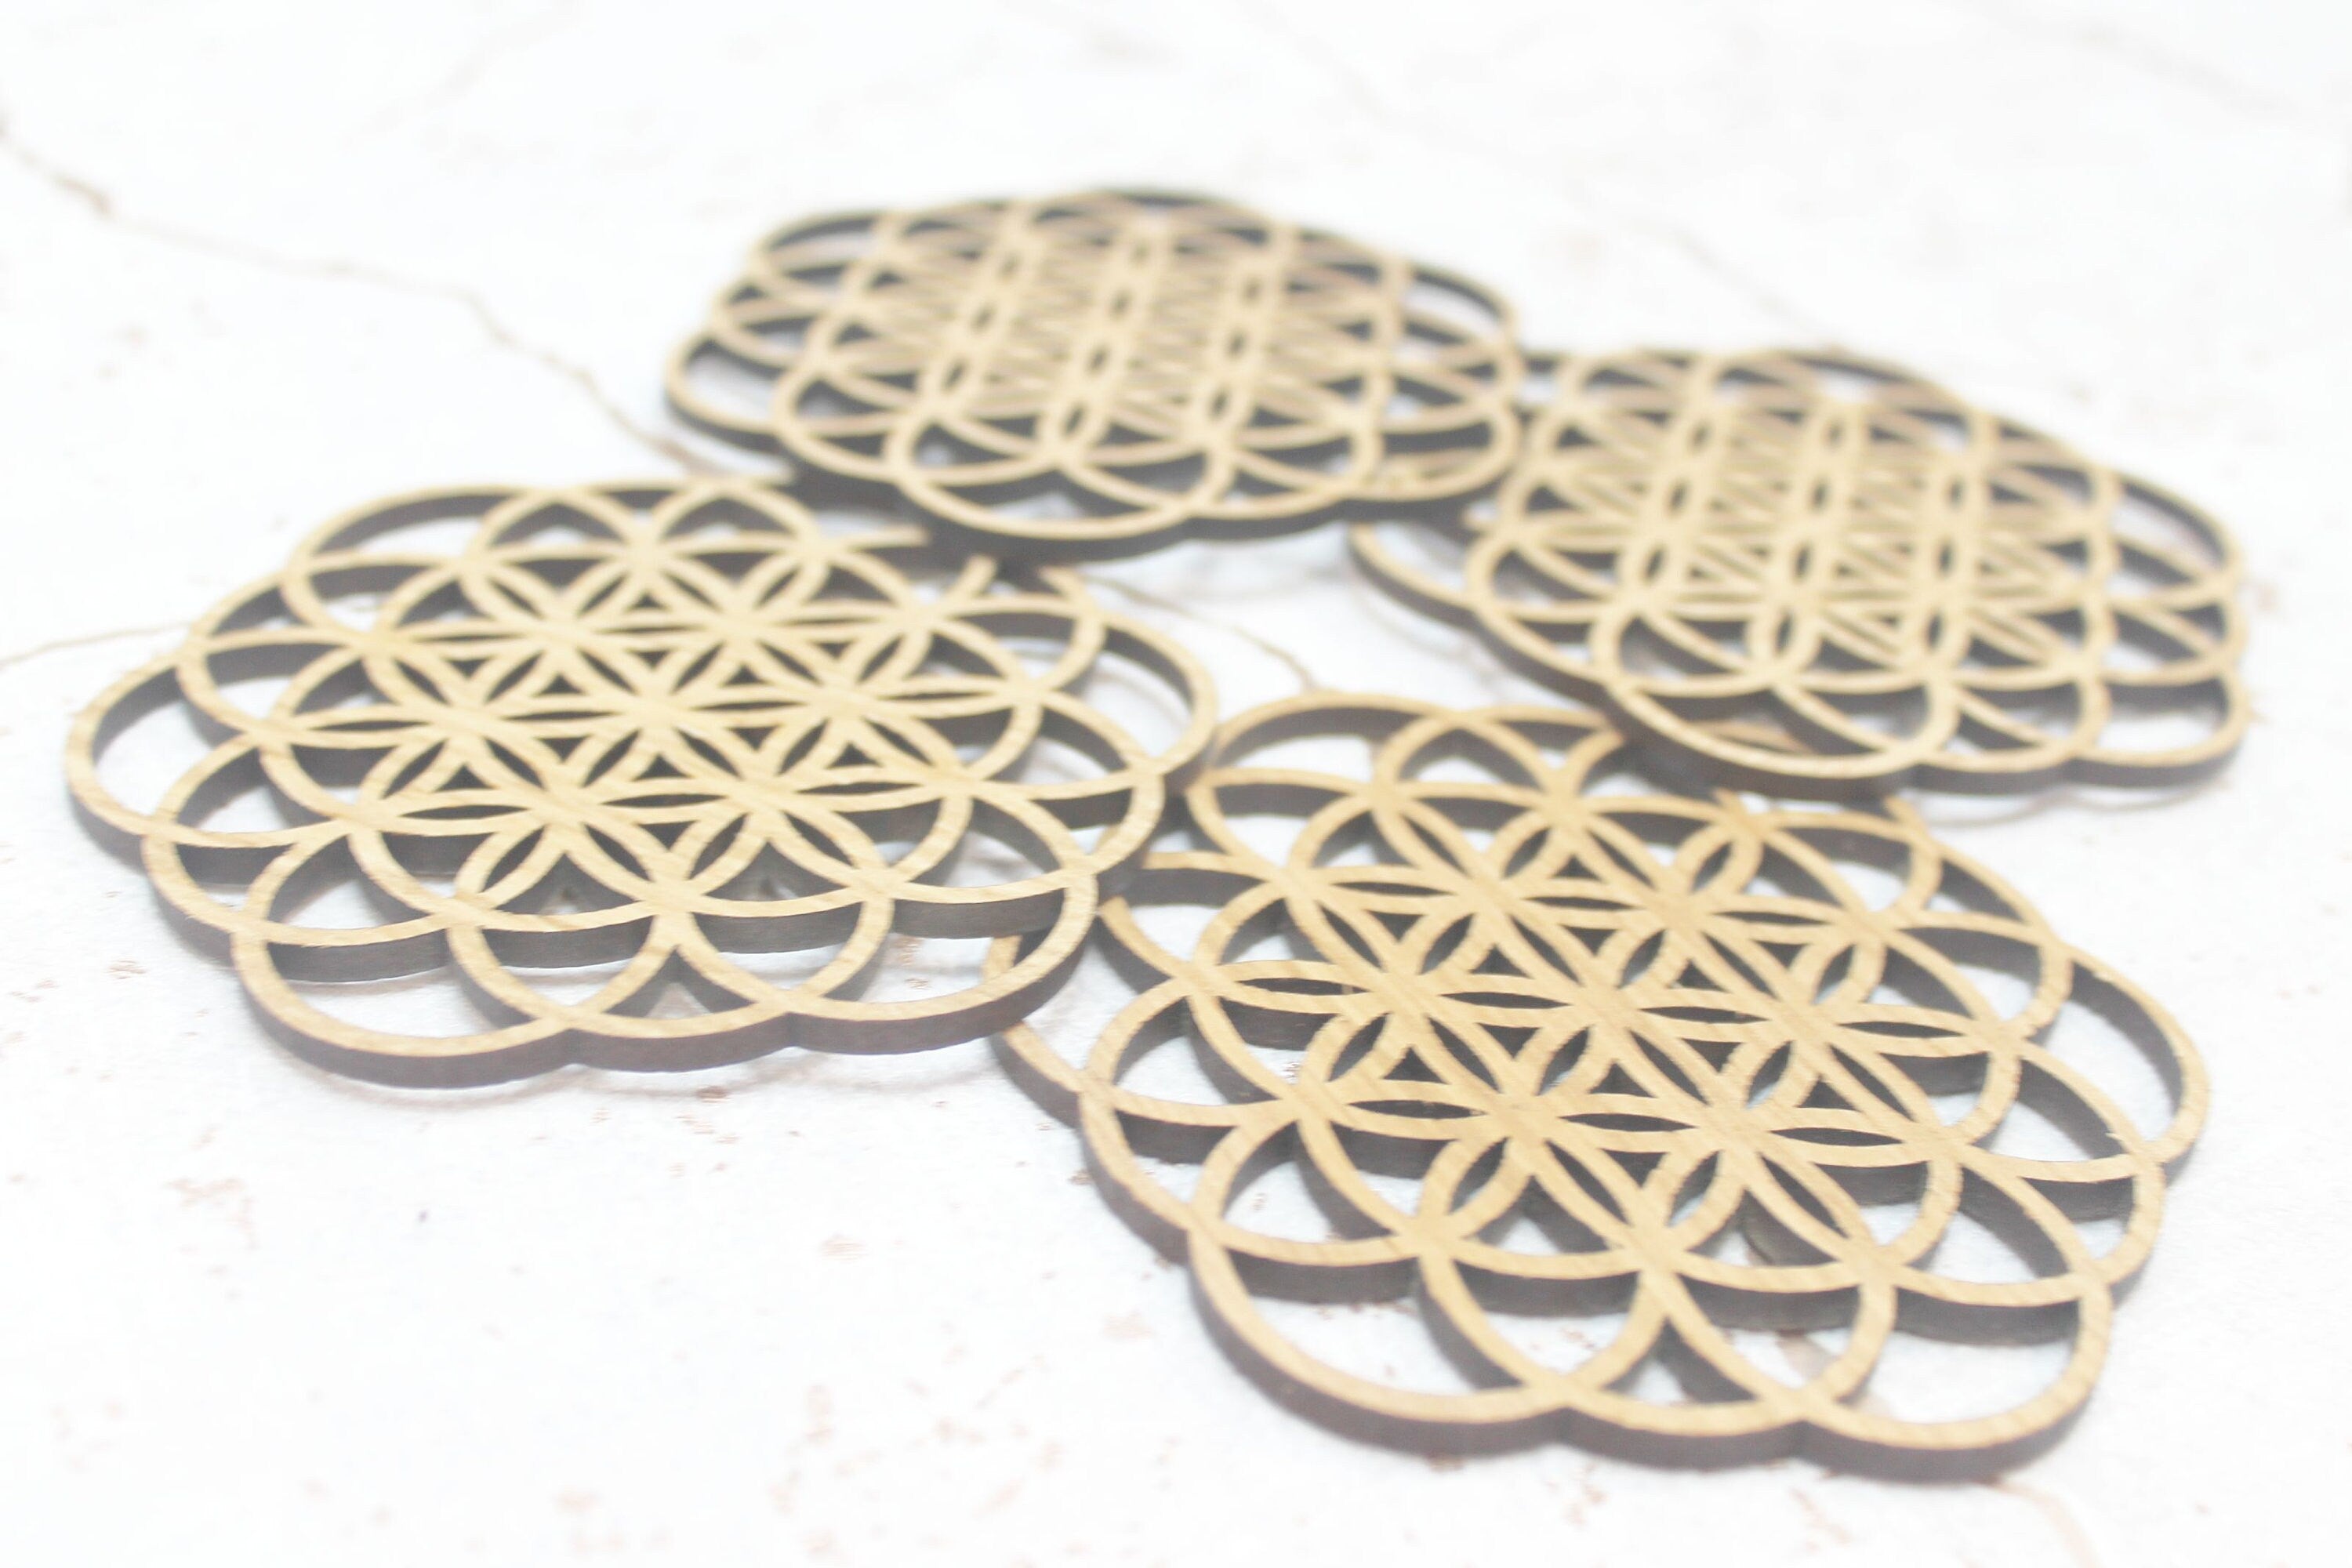 Flower of Life Foundations Sacred Geometry Laser Cut Coasters Set of 4